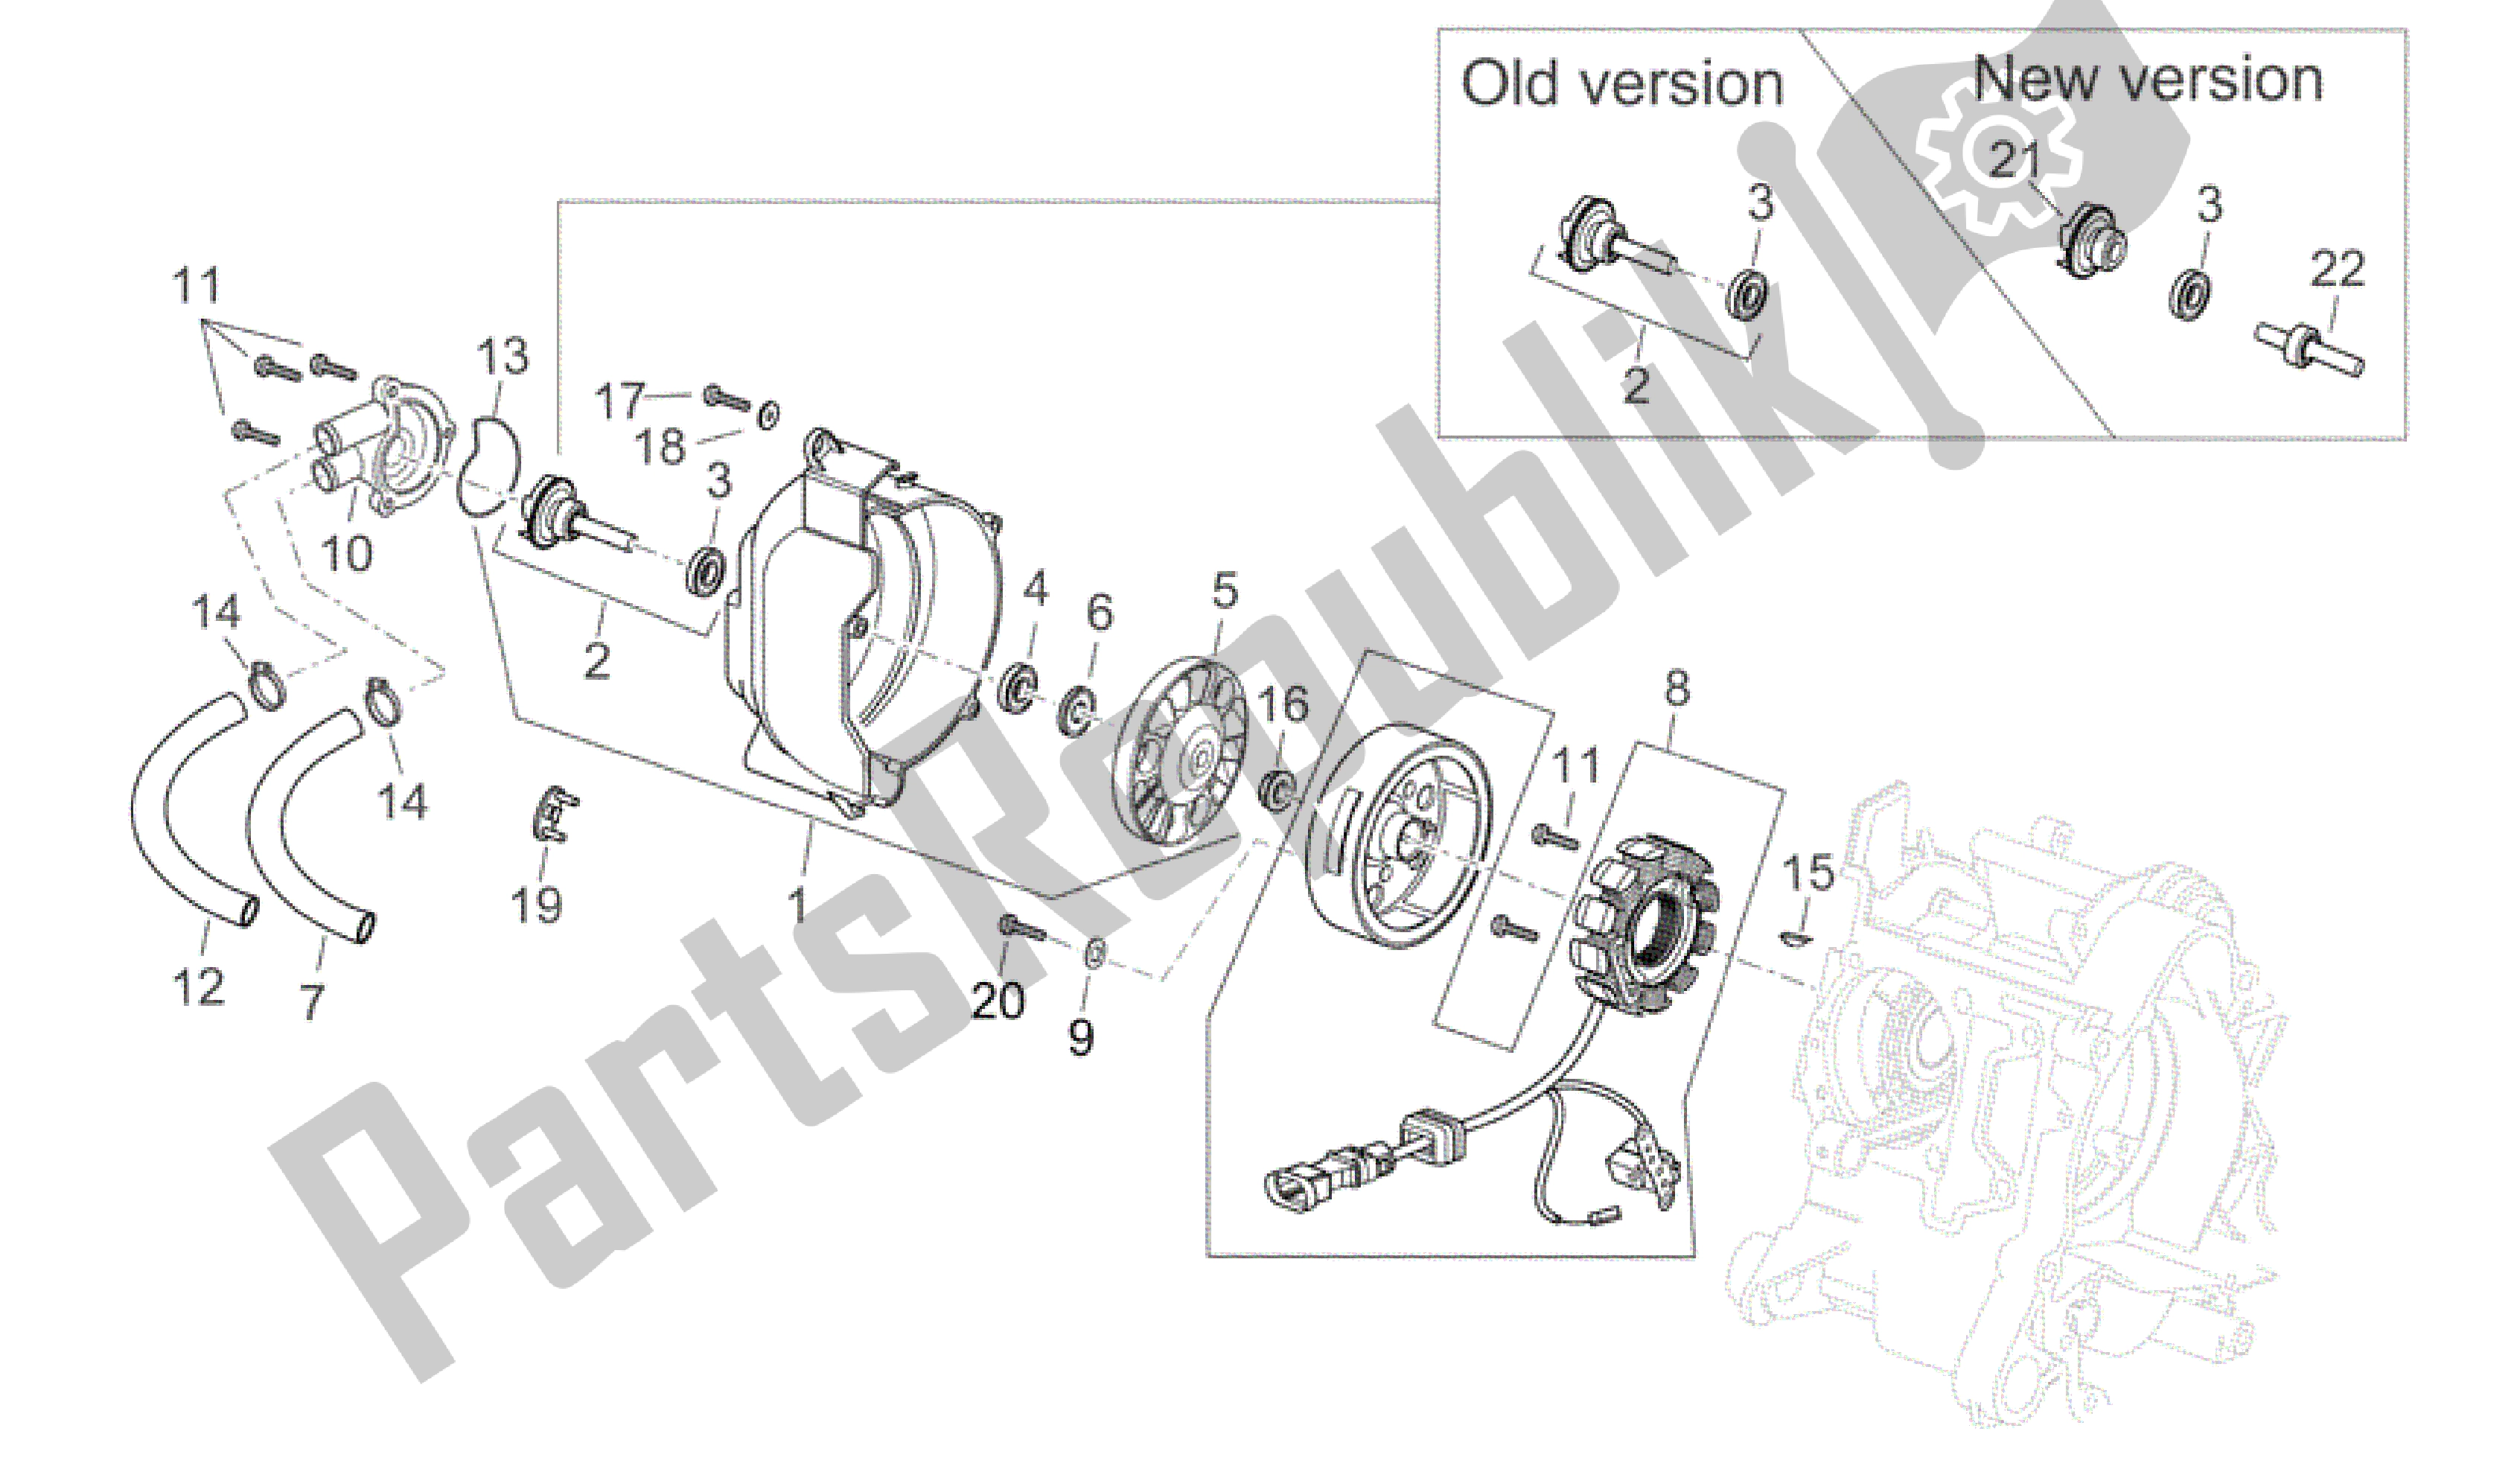 All parts for the Ignition Unit I of the Aprilia Scarabeo 125 2004 - 2006